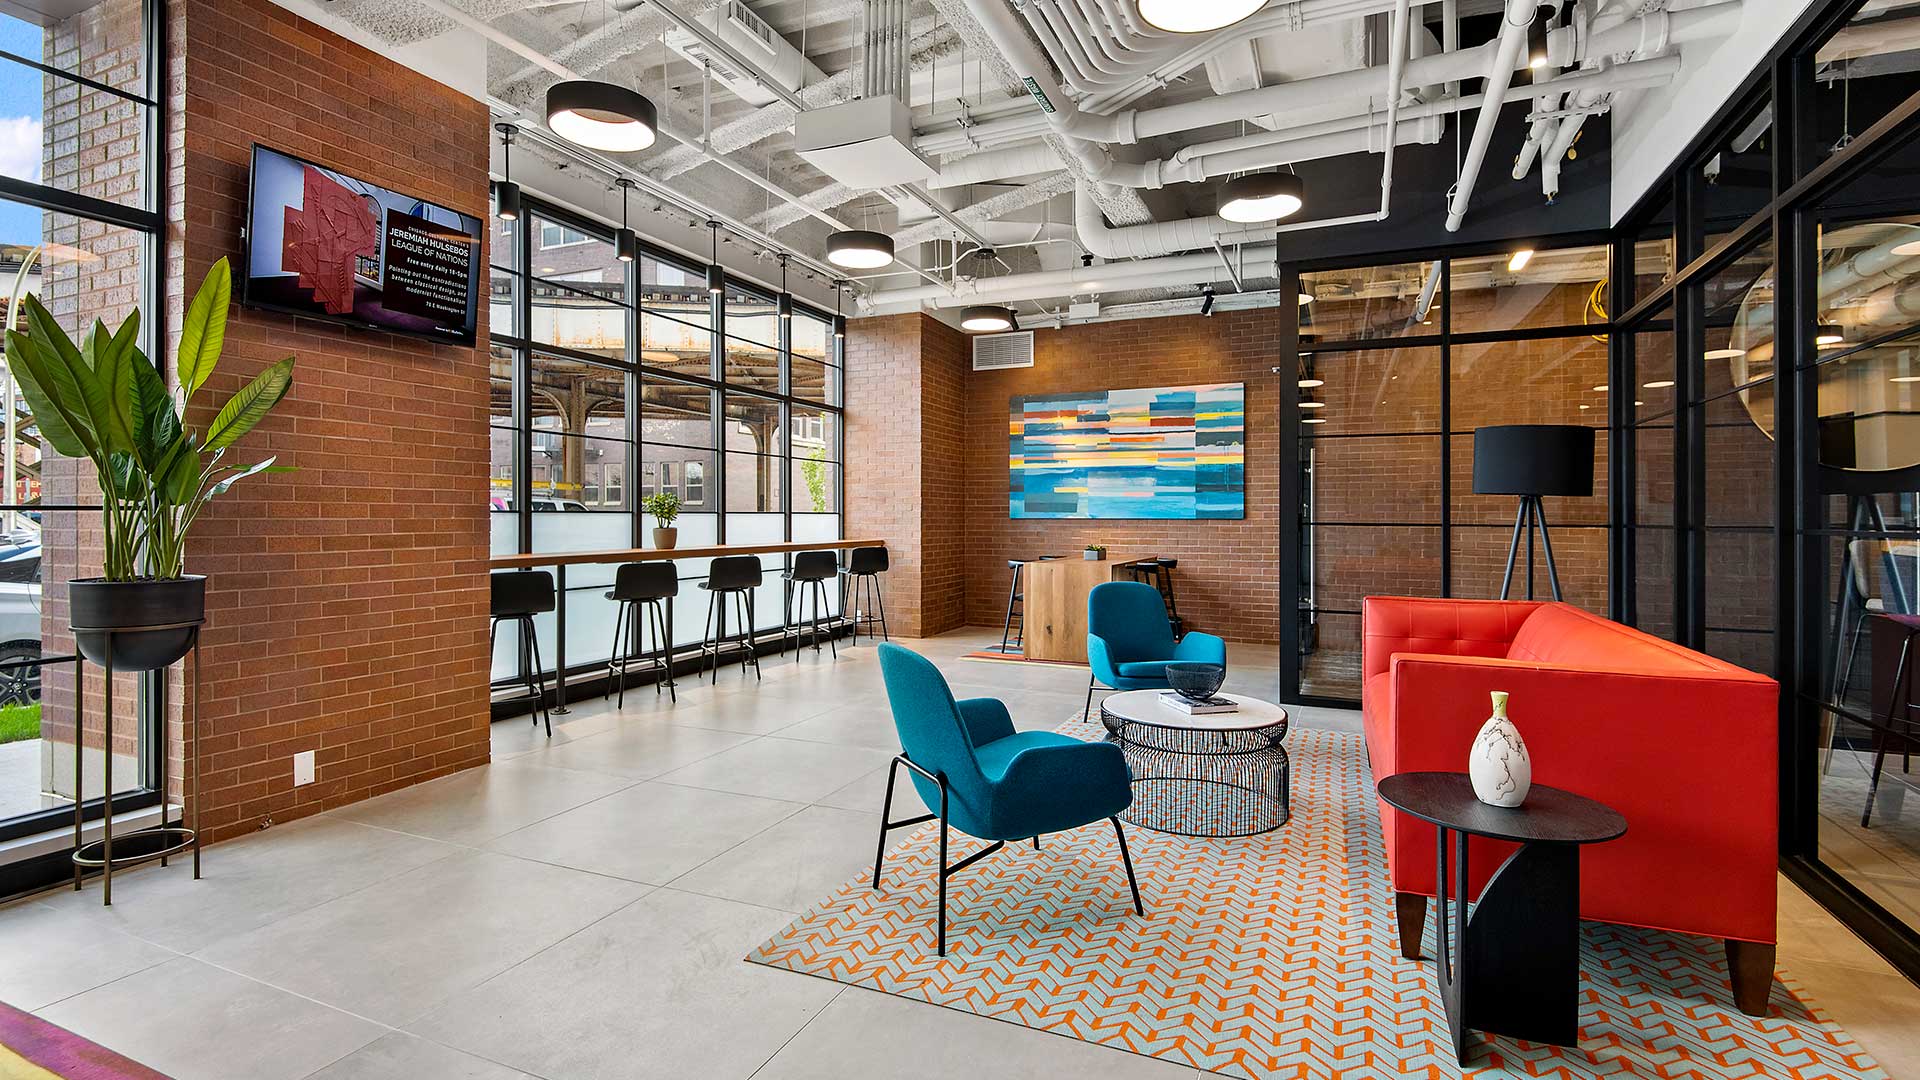 Brightly colored furniture sits along the interior windows in the lobby at Wrigleyville Lofts. The exterior windows are off the left with a stools and a bar lining them.